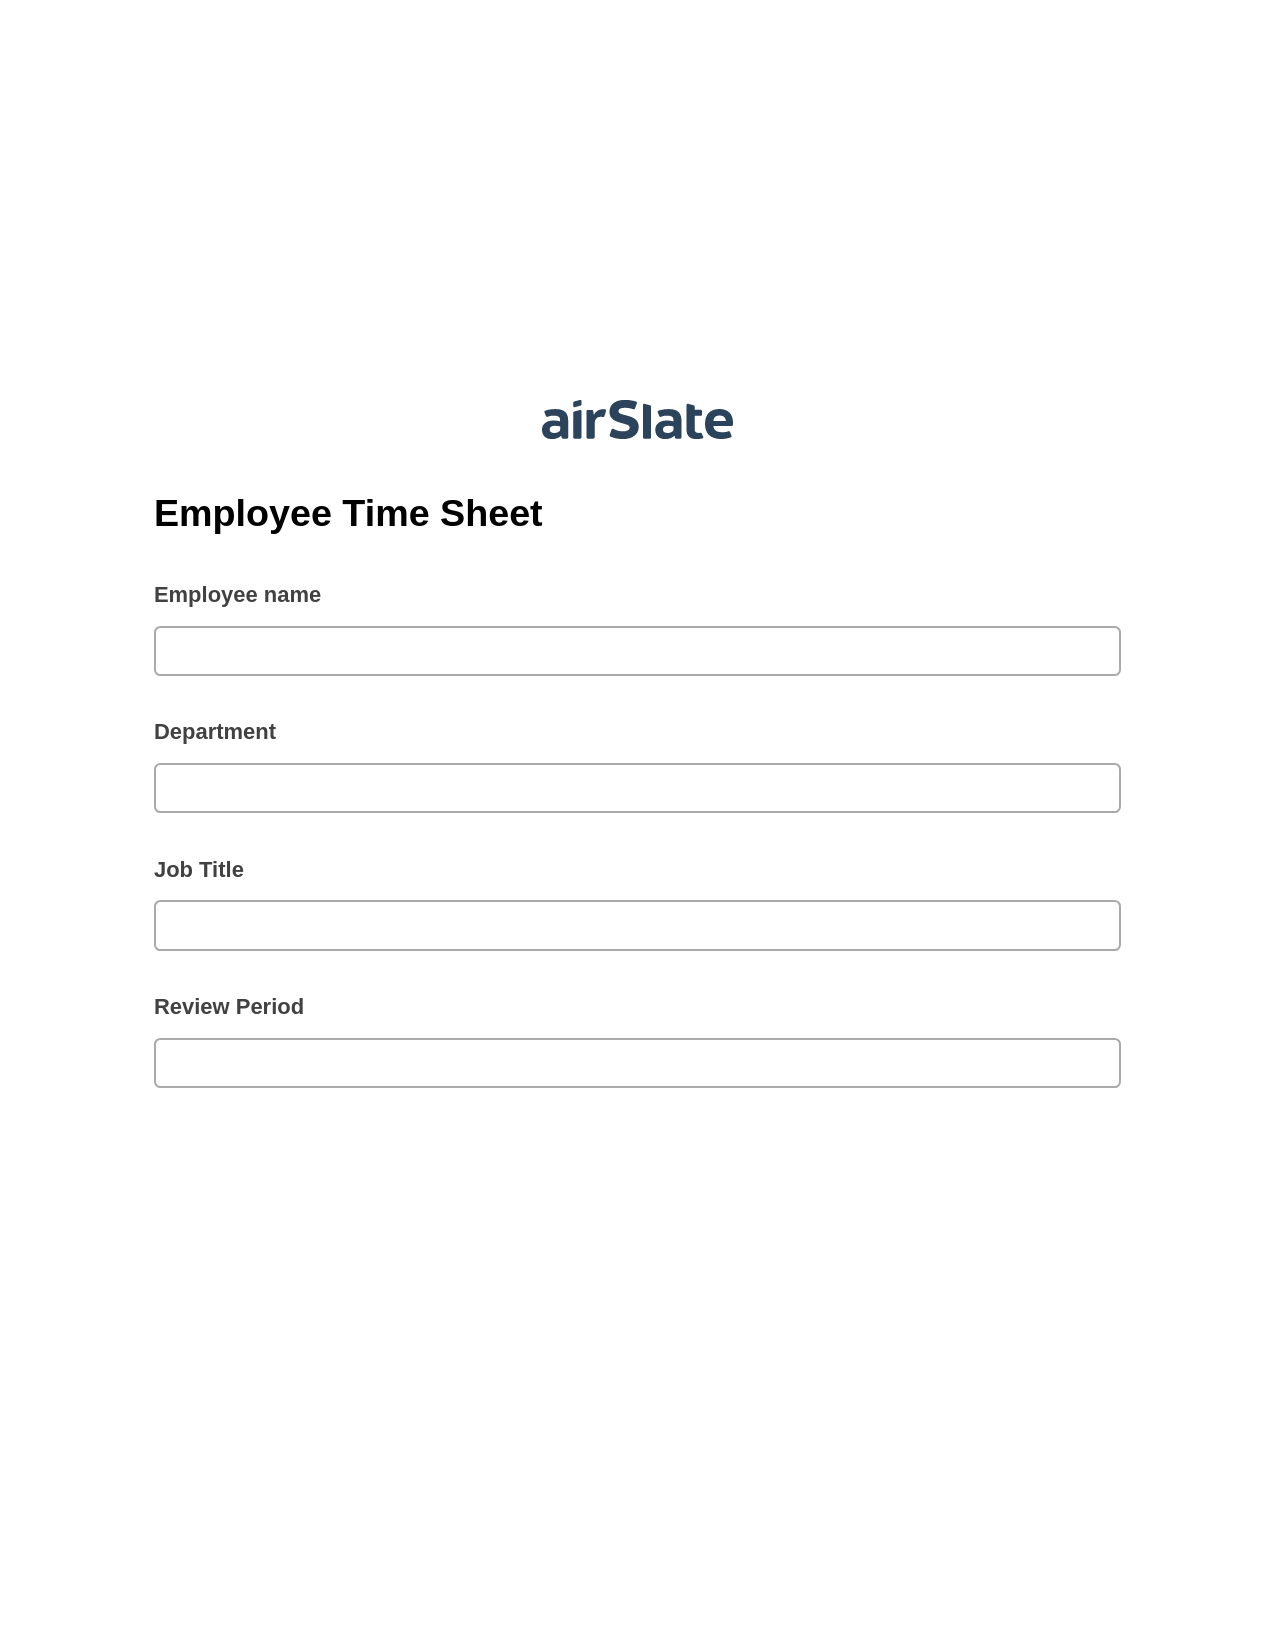 Employee Time Sheet Pre-fill Dropdowns from MySQL Bot, Create slate addon, Export to NetSuite Bot